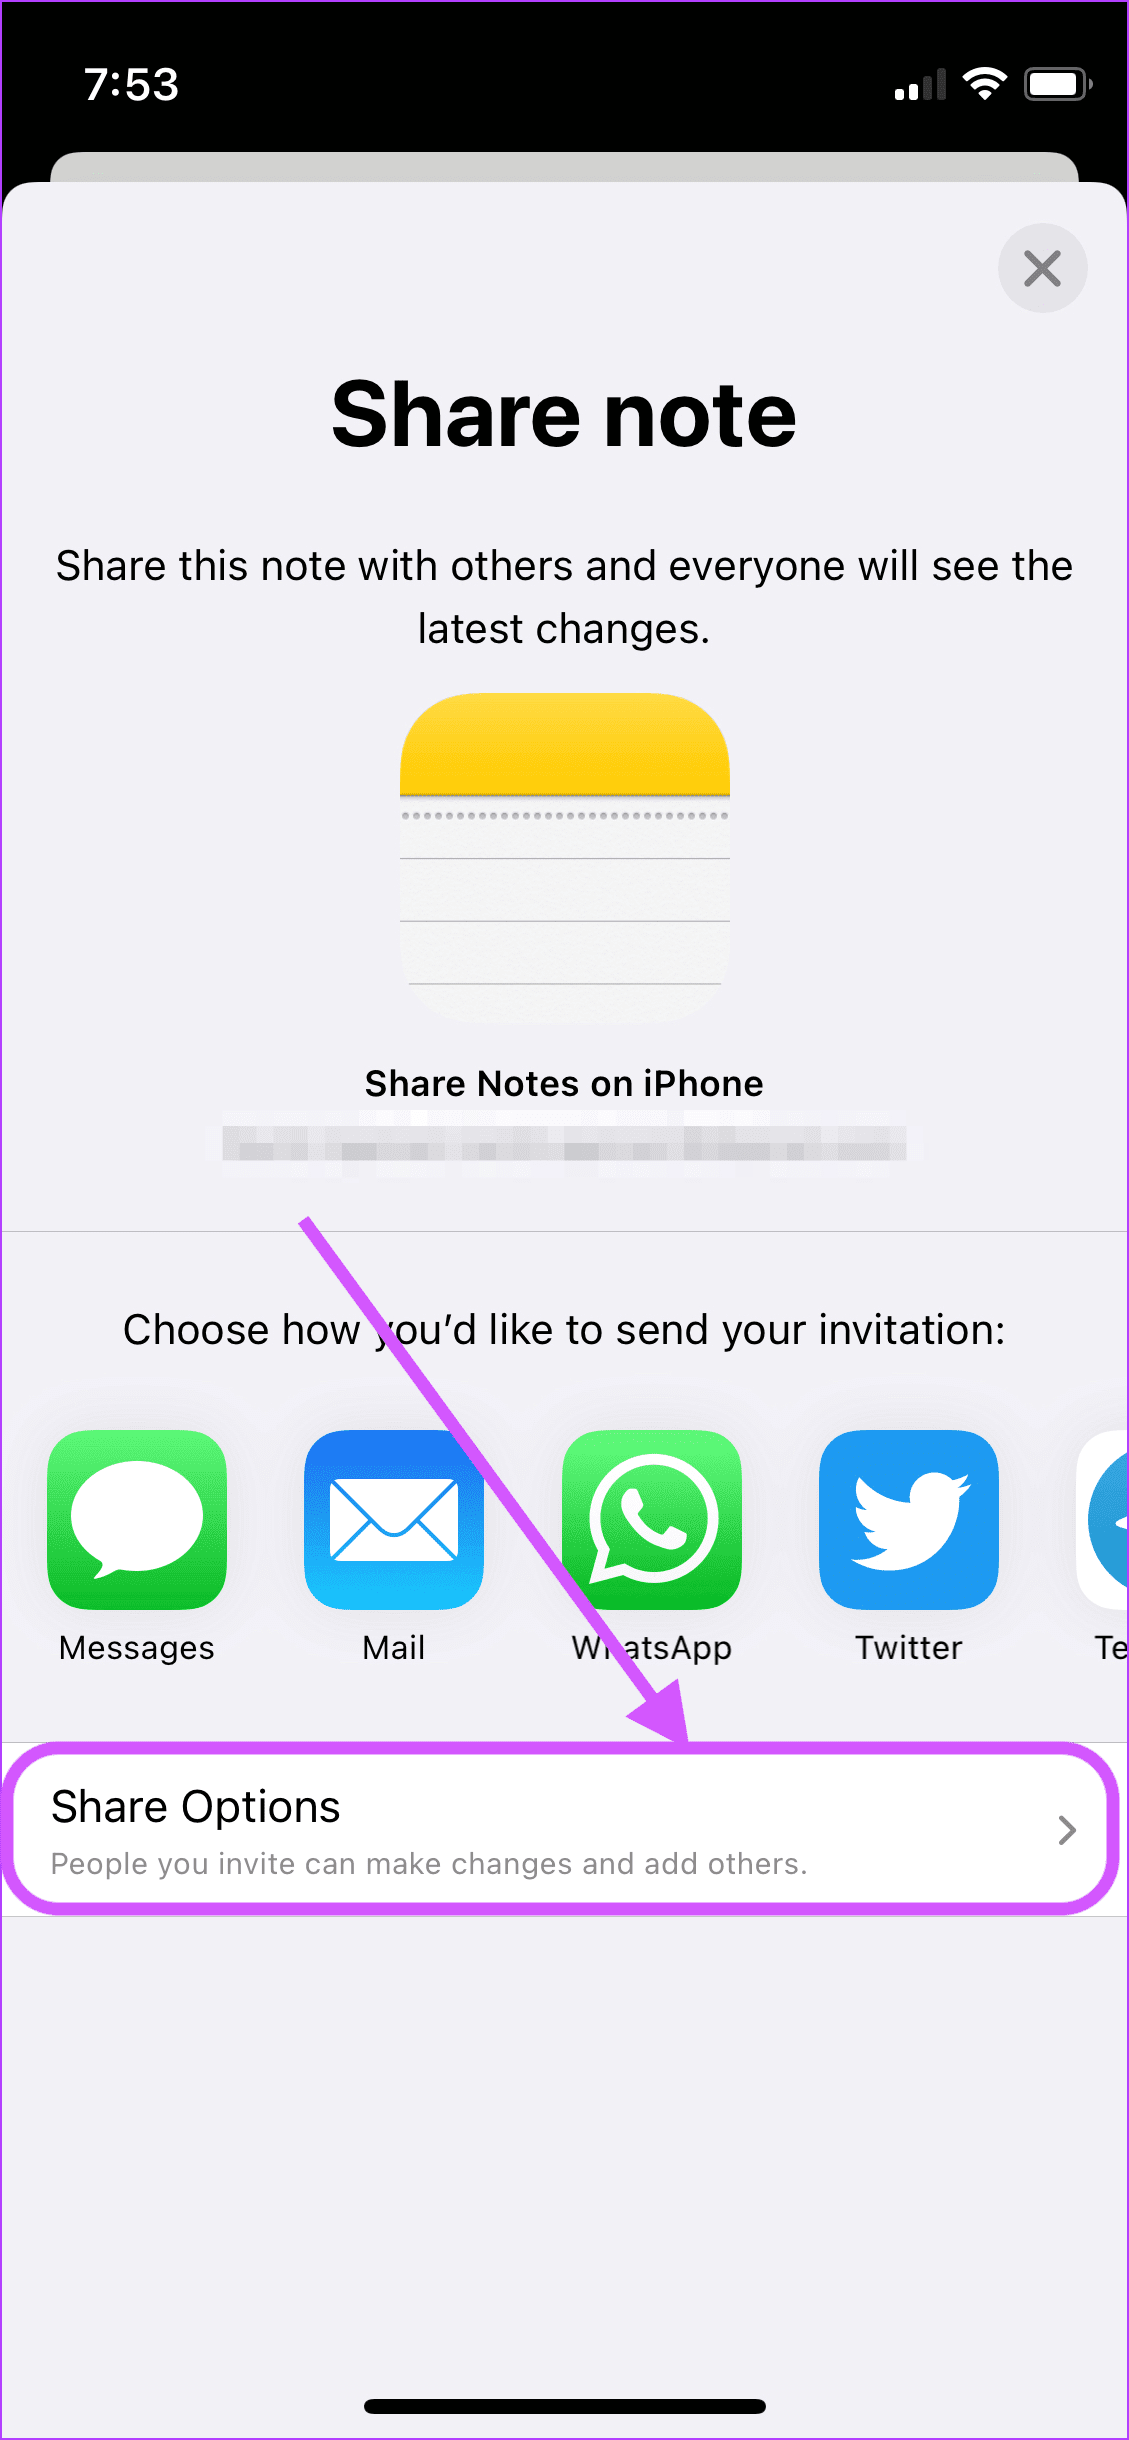 4. Manage Shared Notes Permissions 1